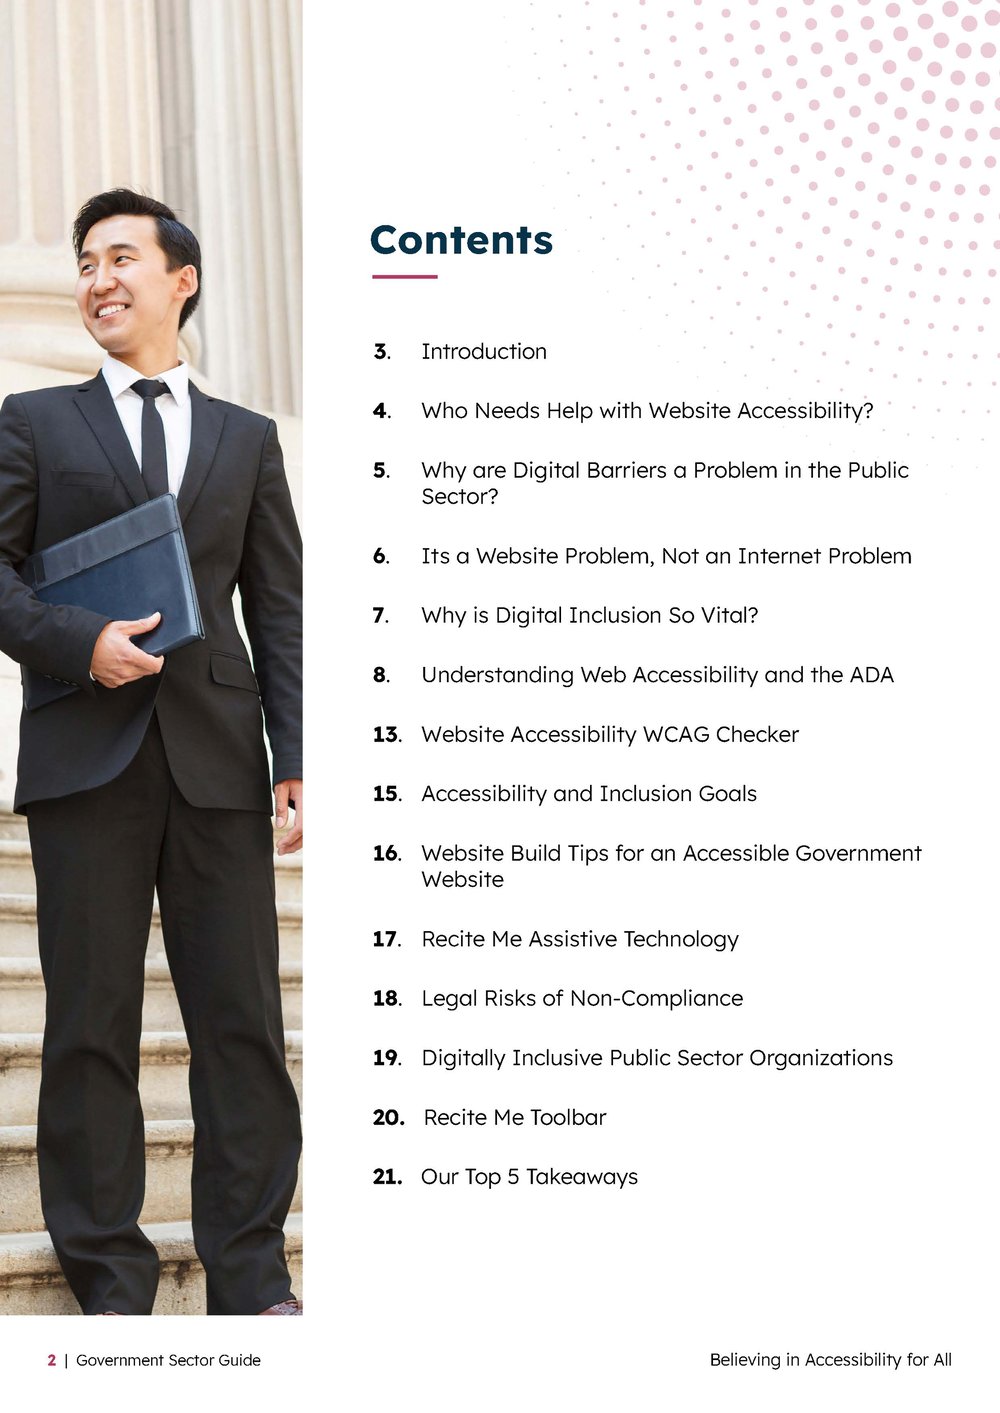 Contents page of the Government Sector Guide